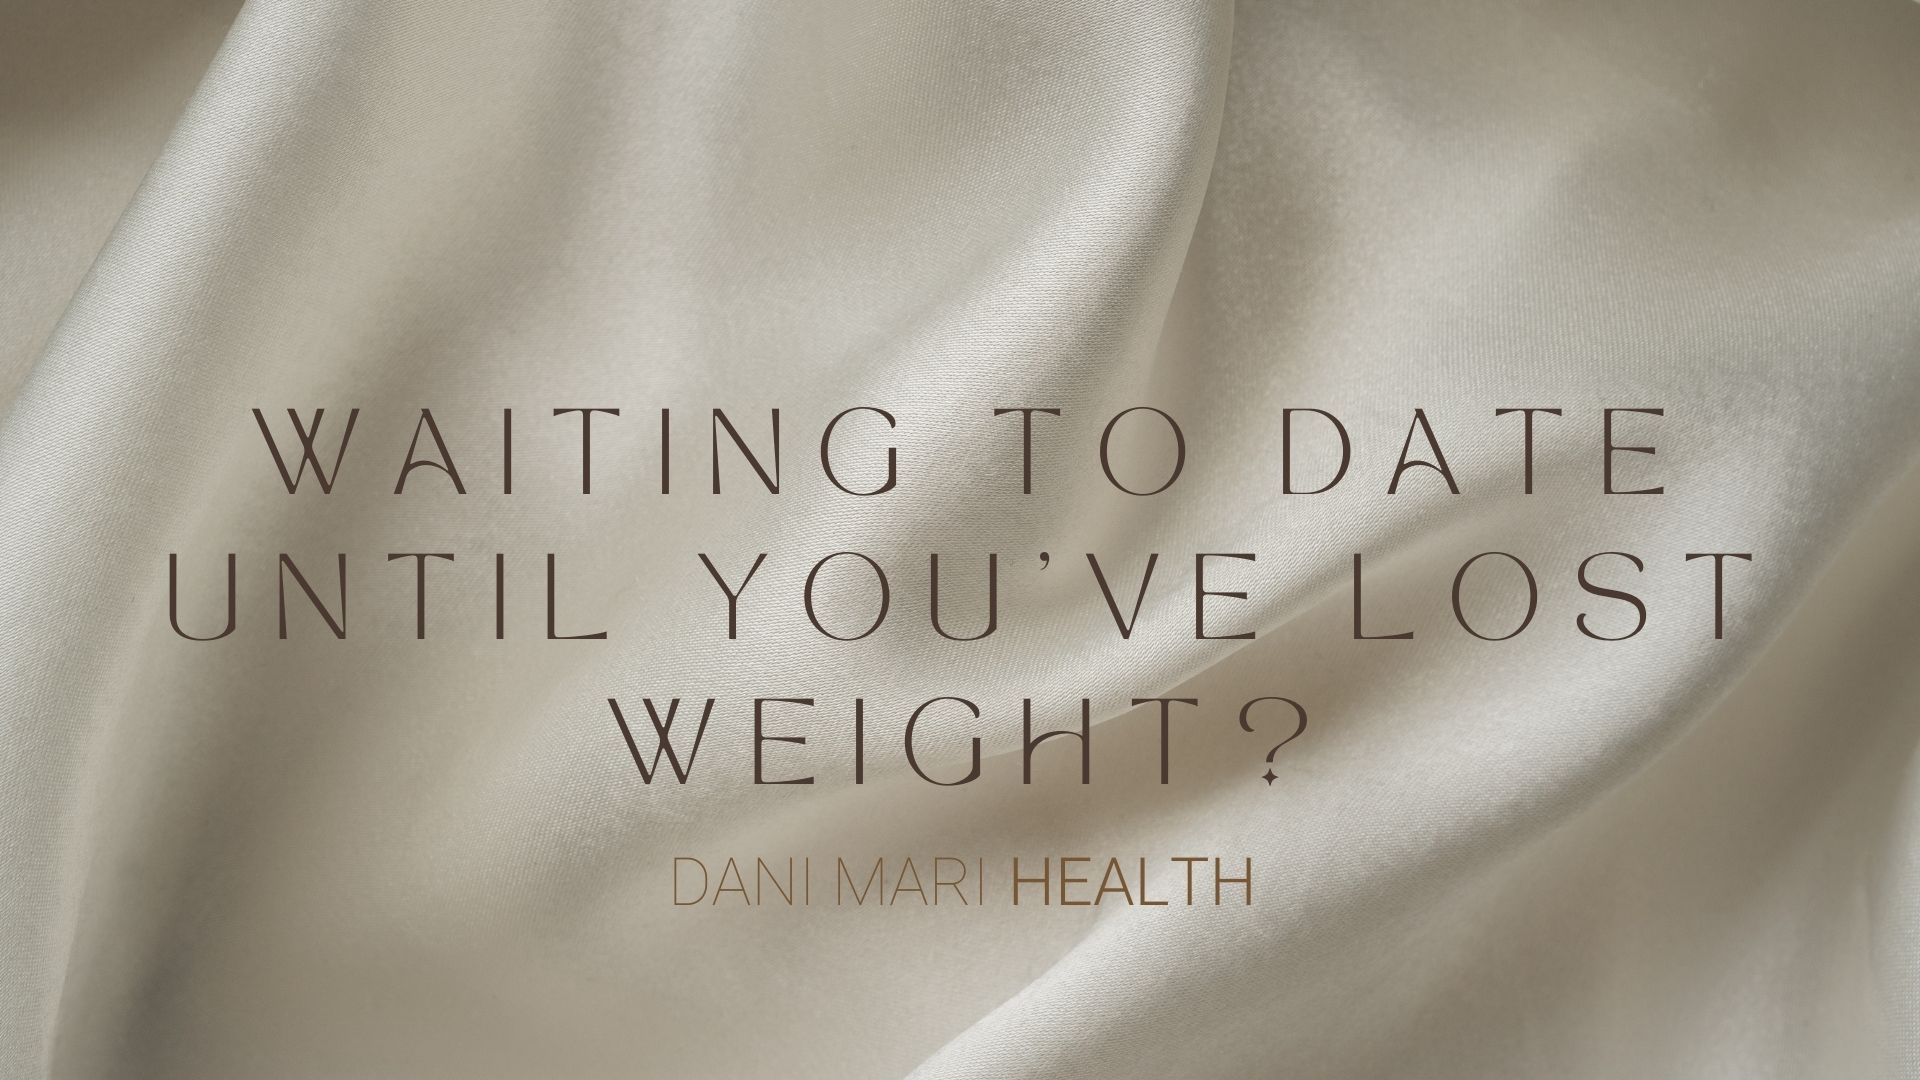 Waiting to date until you’ve lost weight? Read this now! intuitive eating dani schenone dani mari health intuitive eating counselor certified intuitive eating counselor yoga registered yoga teacher certified personal trainer fitness yoga health wellness